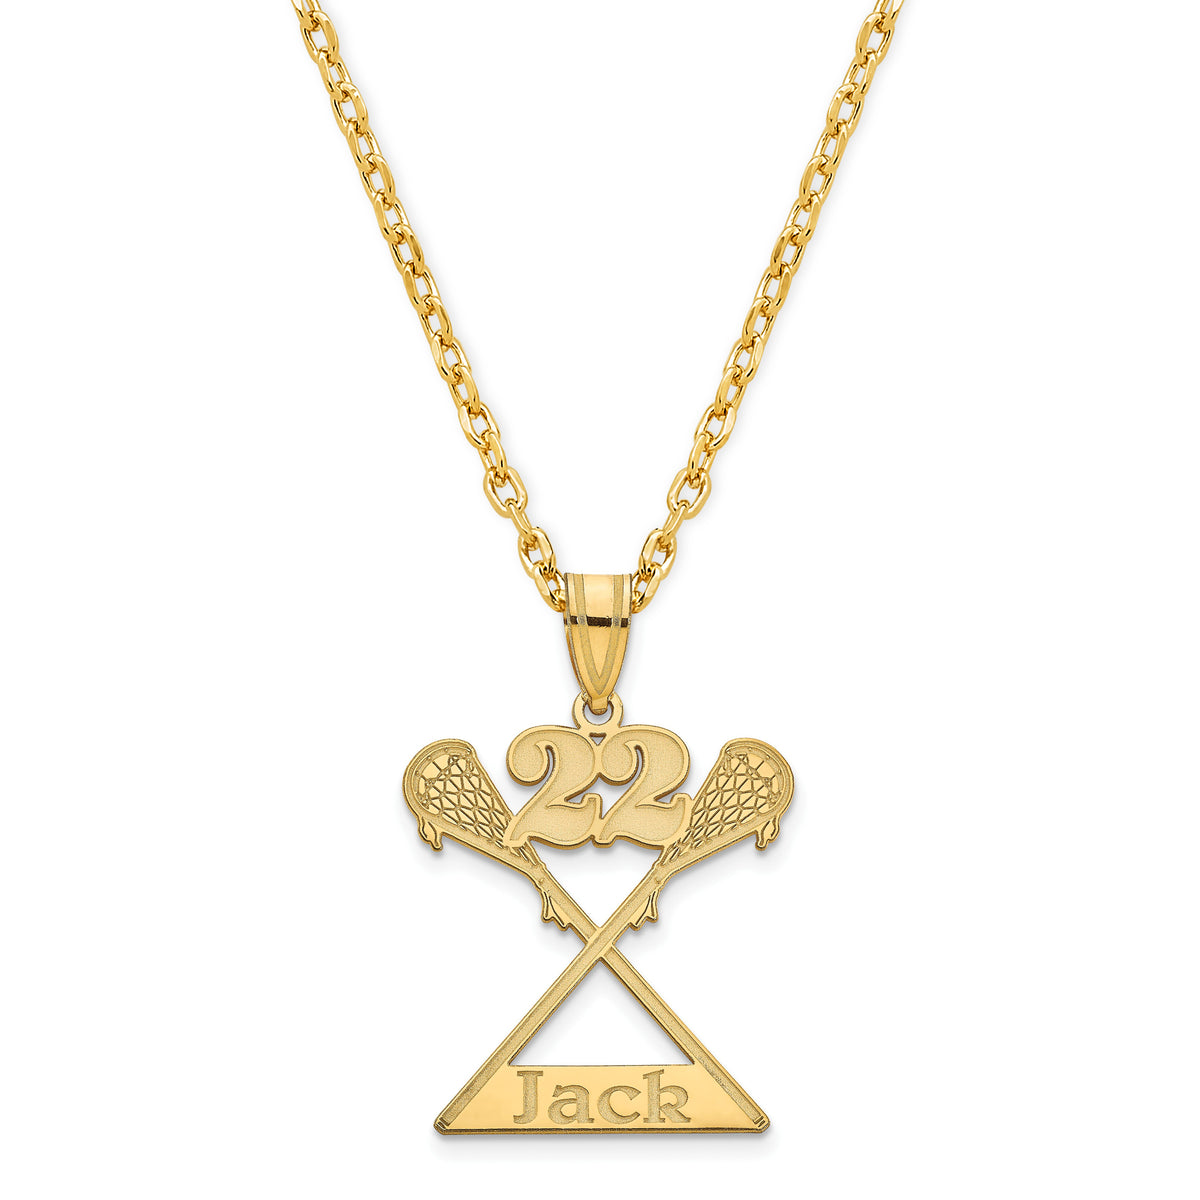 Personalized Lacrosse Pendant w/ Name & Number Necklace included  in Sterling Silver , Gold Plated or 10k Gold Laser Engraved LAX Pendant